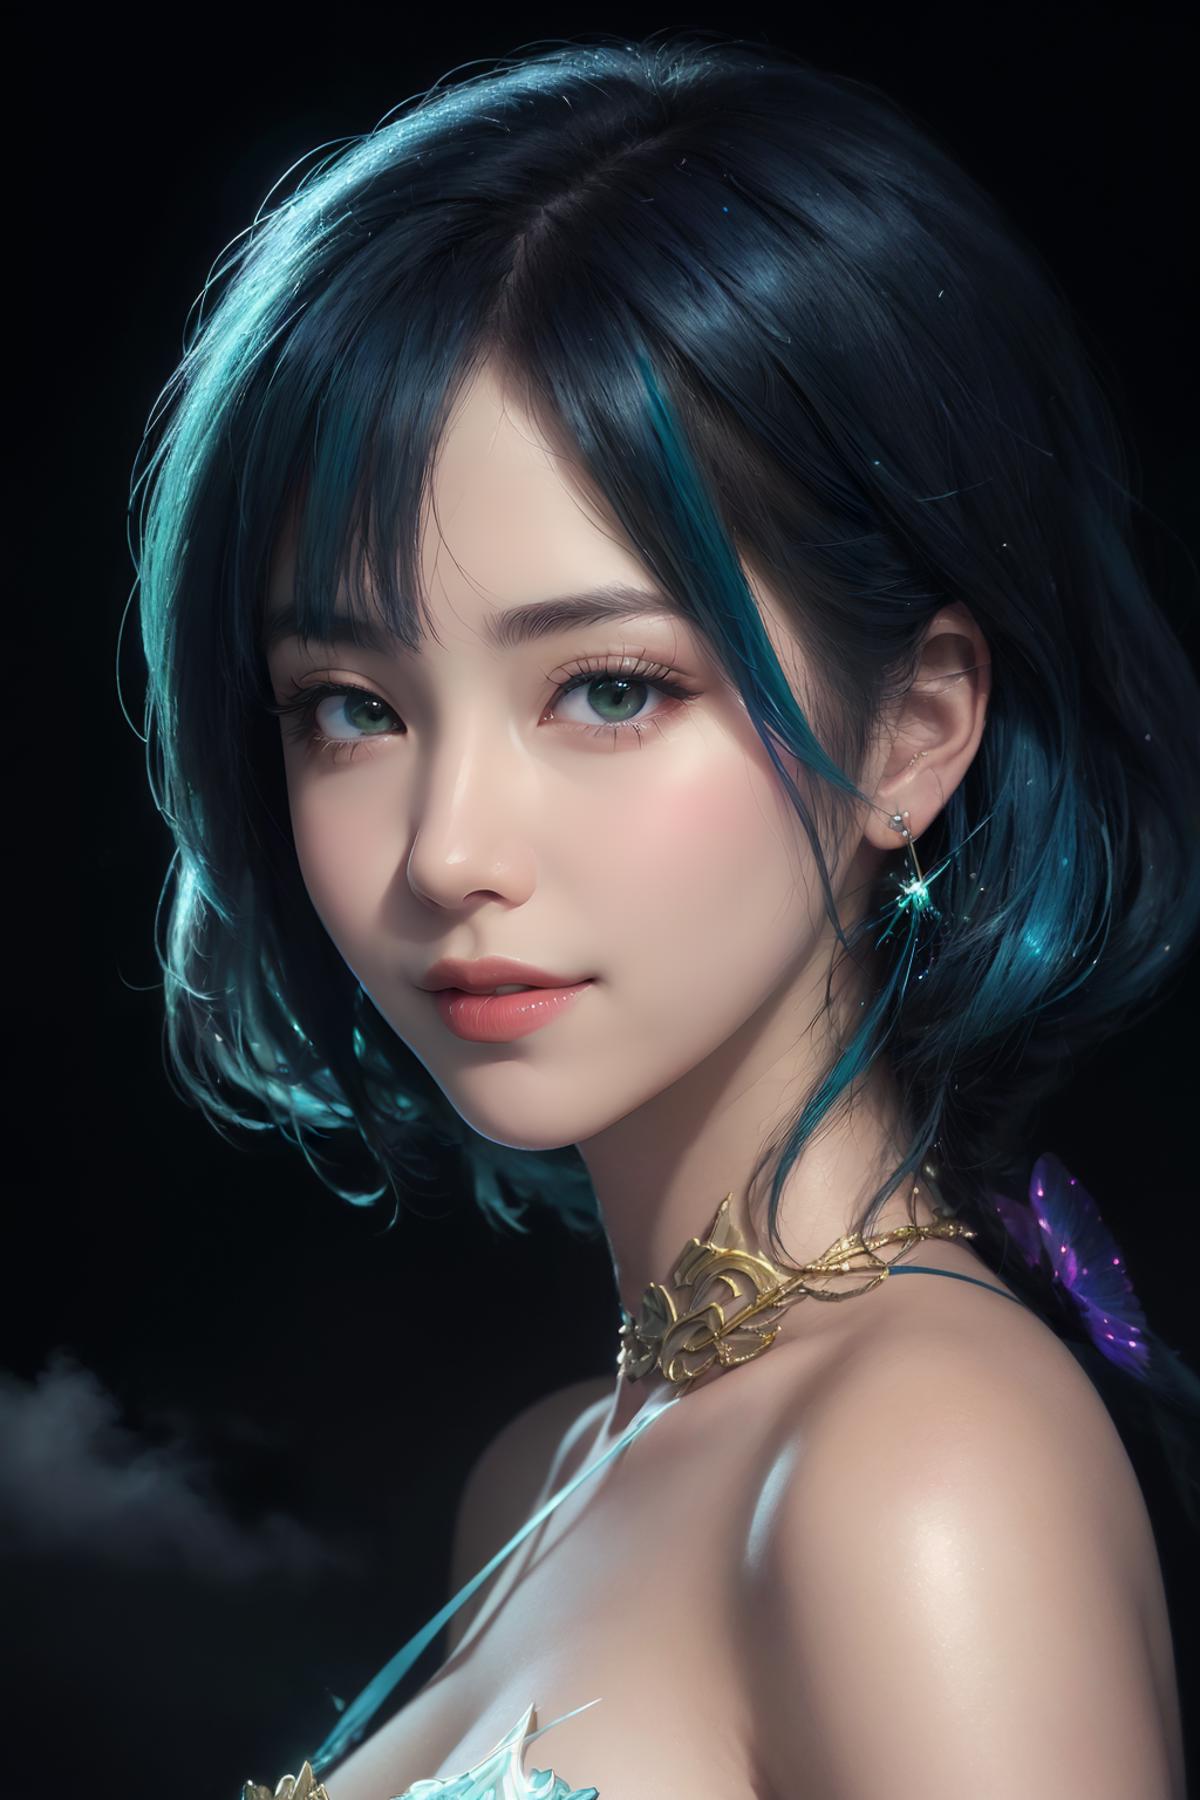 AI model image by 717373